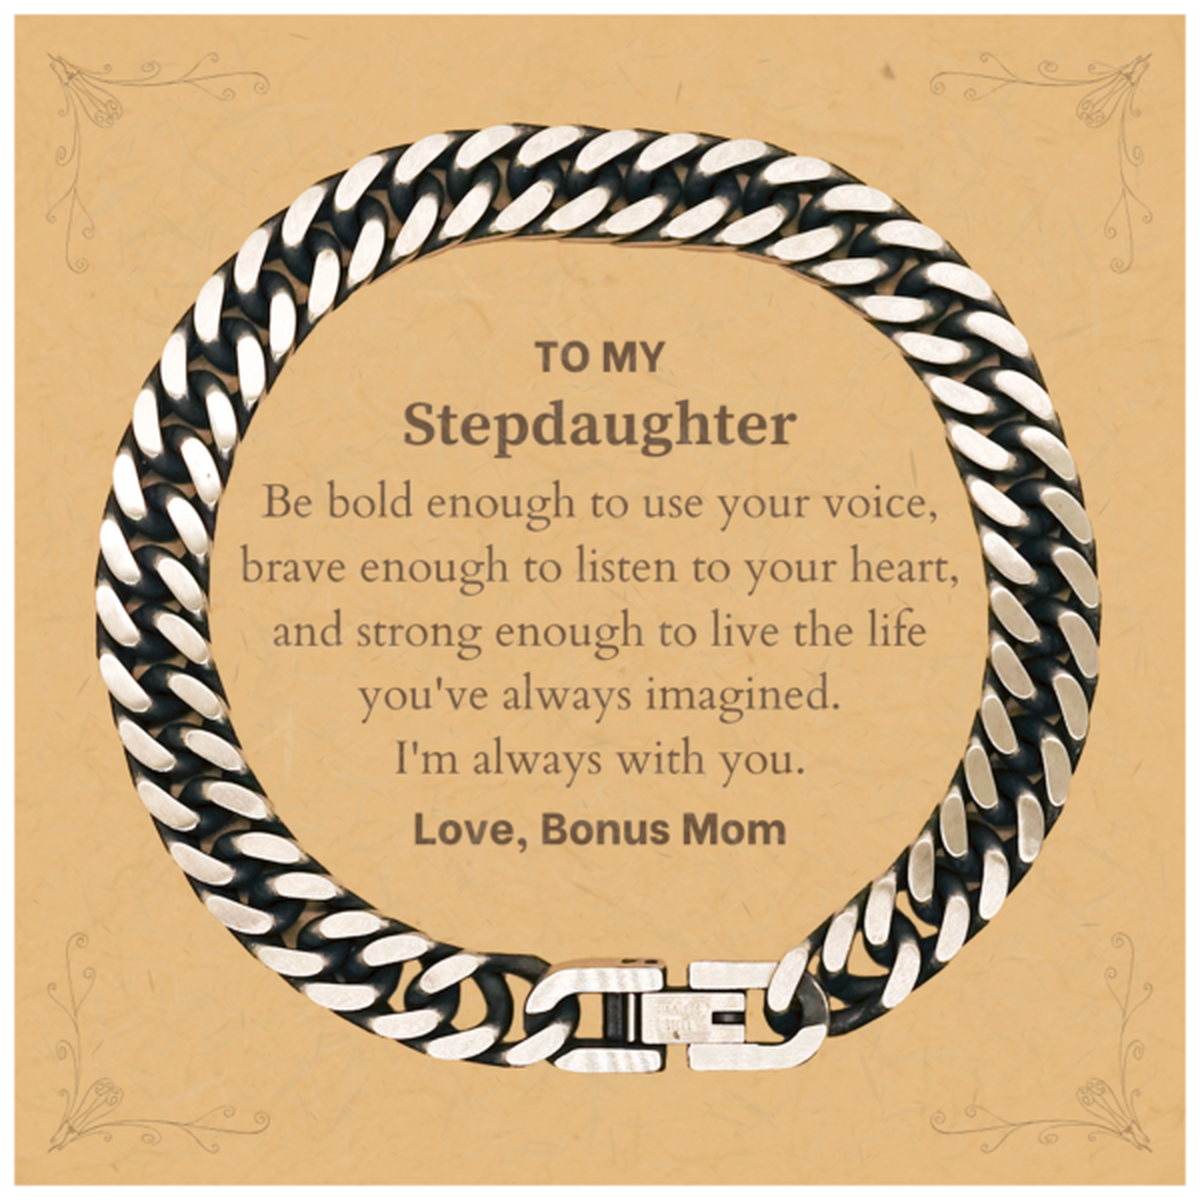 Keepsake Stepdaughter Cuban Link Chain Bracelet Gift Idea Graduation Christmas Birthday Stepdaughter from Bonus Mom, Stepdaughter Be bold enough to use your voice, brave enough to listen to your heart. Love, Bonus Mom